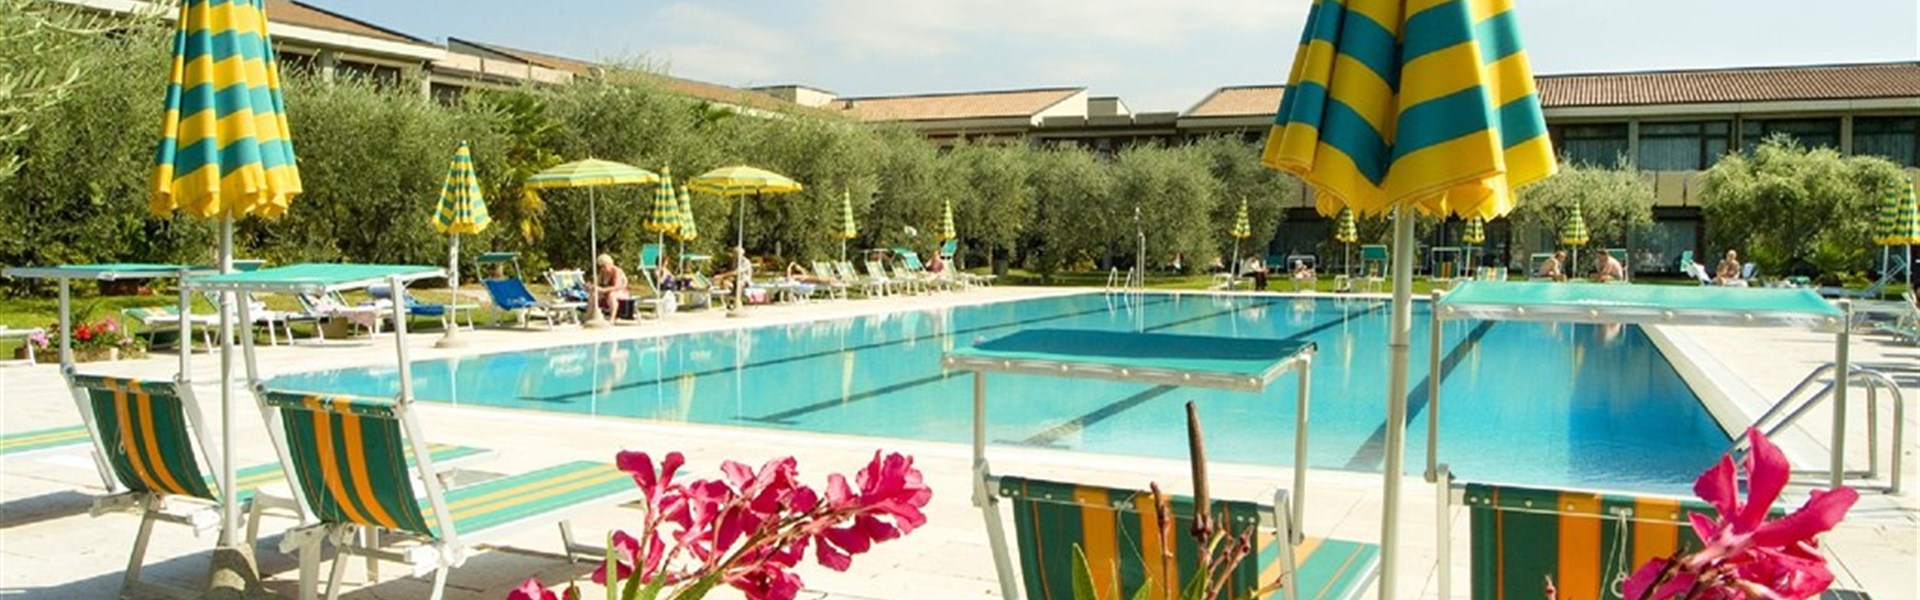 Marco Polo - Parkhotel Oasi - 